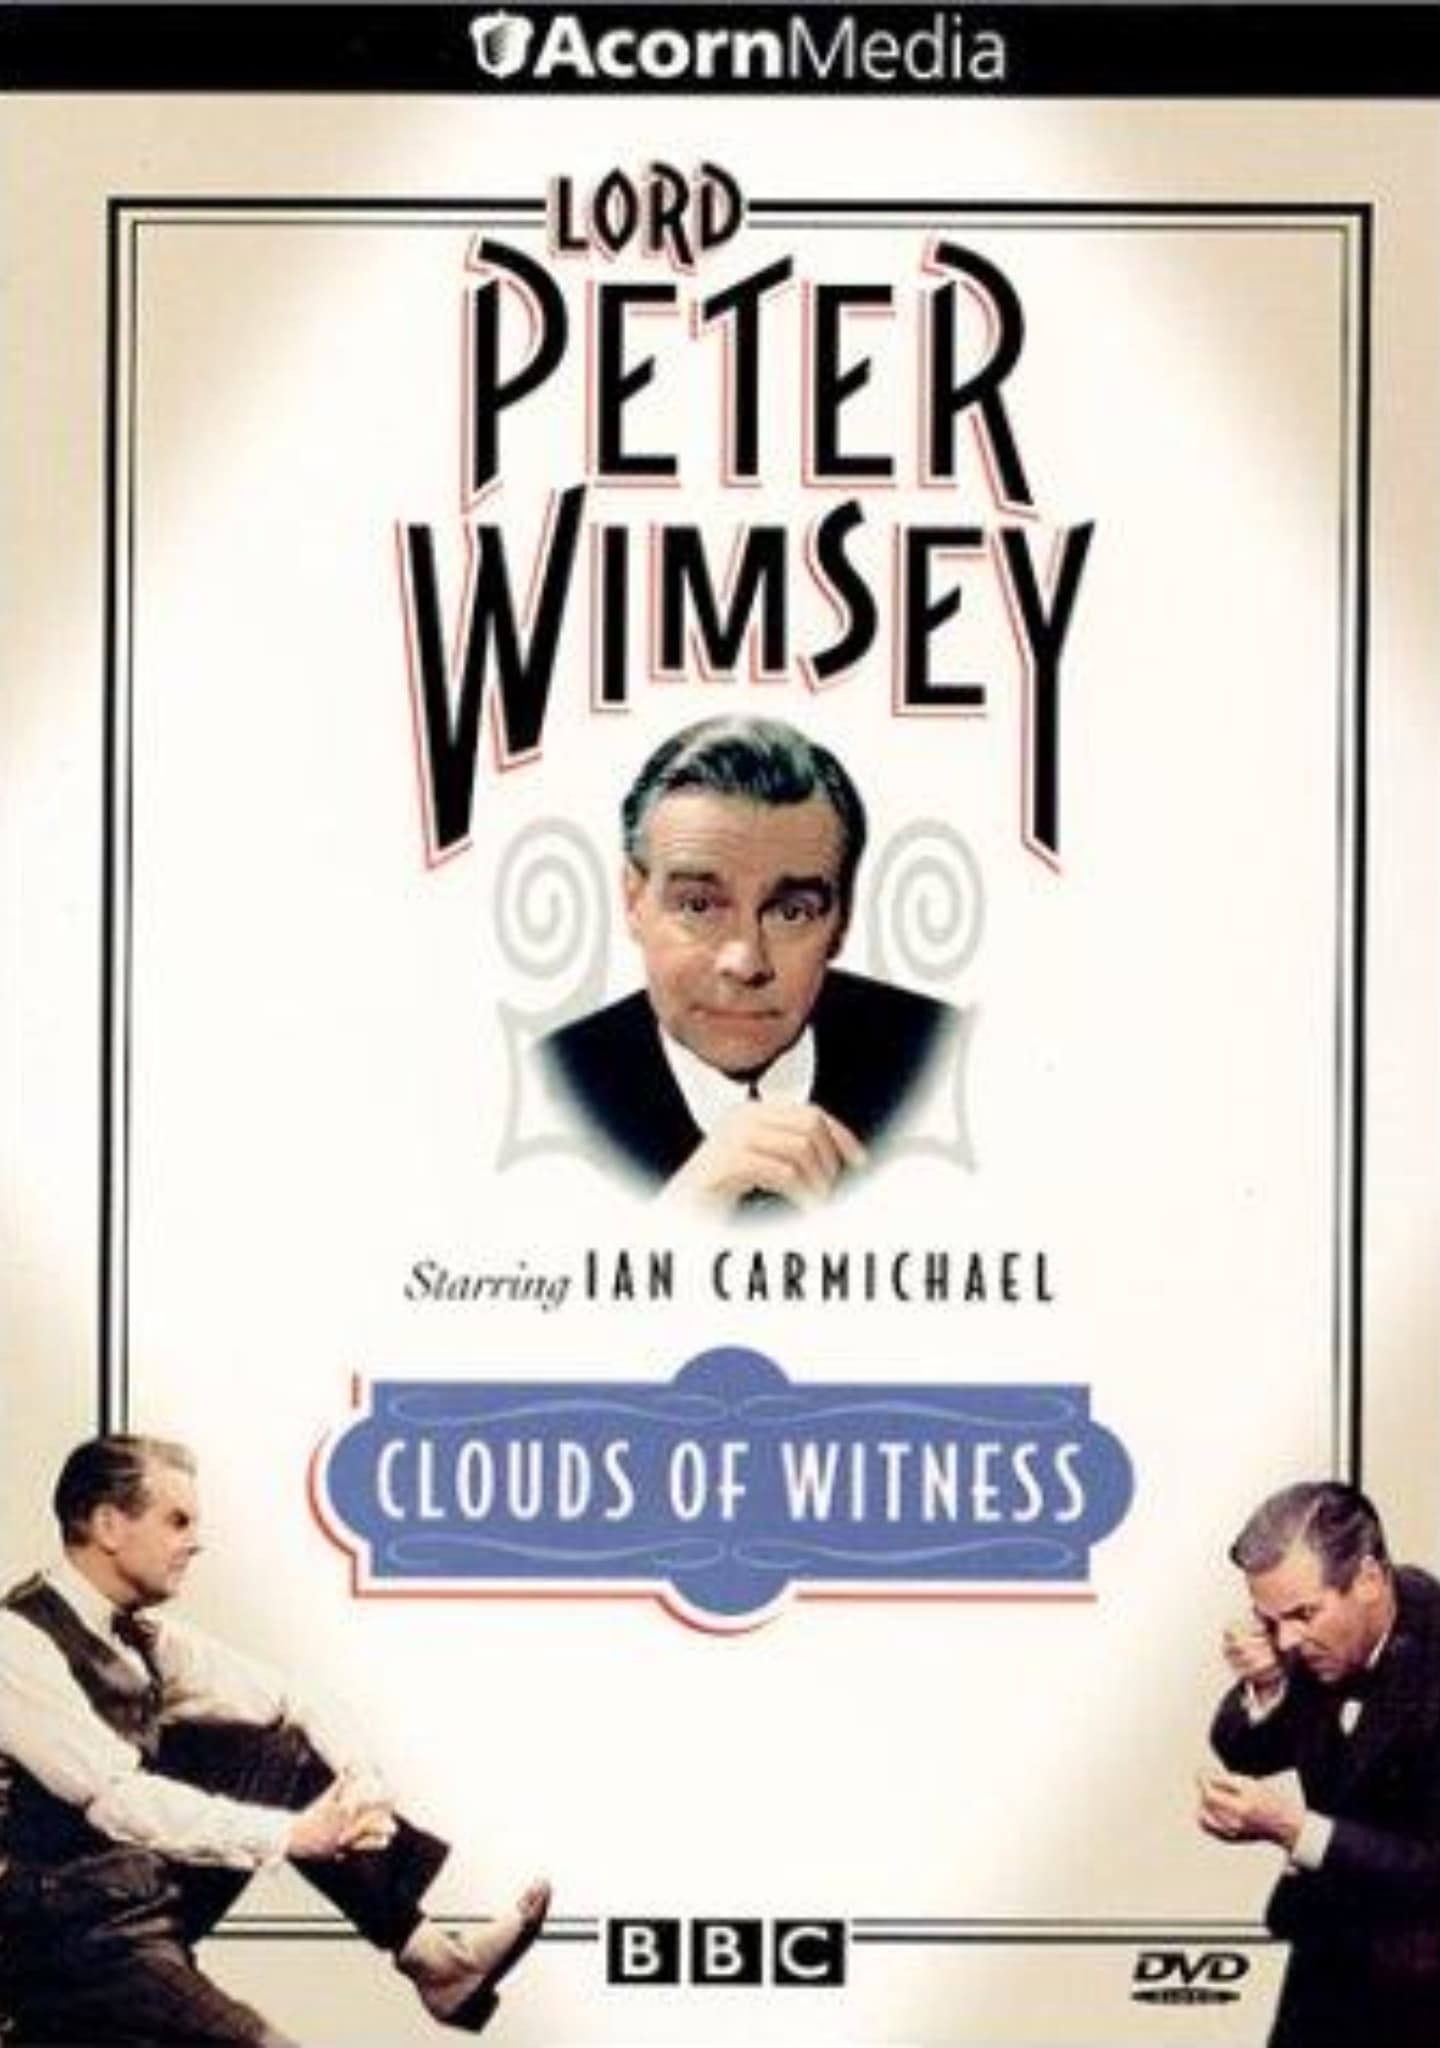 Lord Peter Wimsey: Clouds of Witness